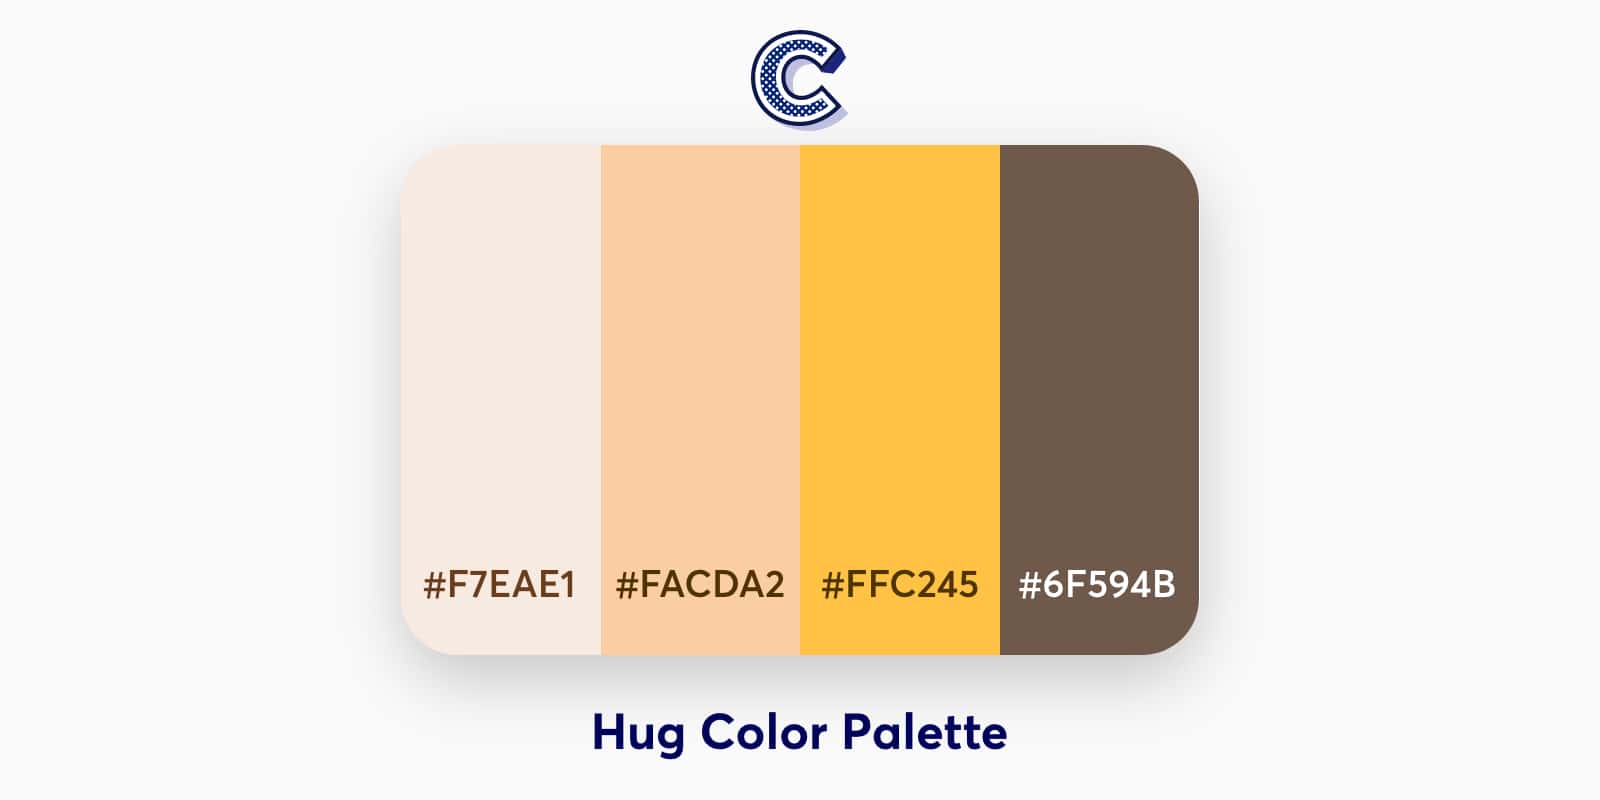 the featured image of hug color palette